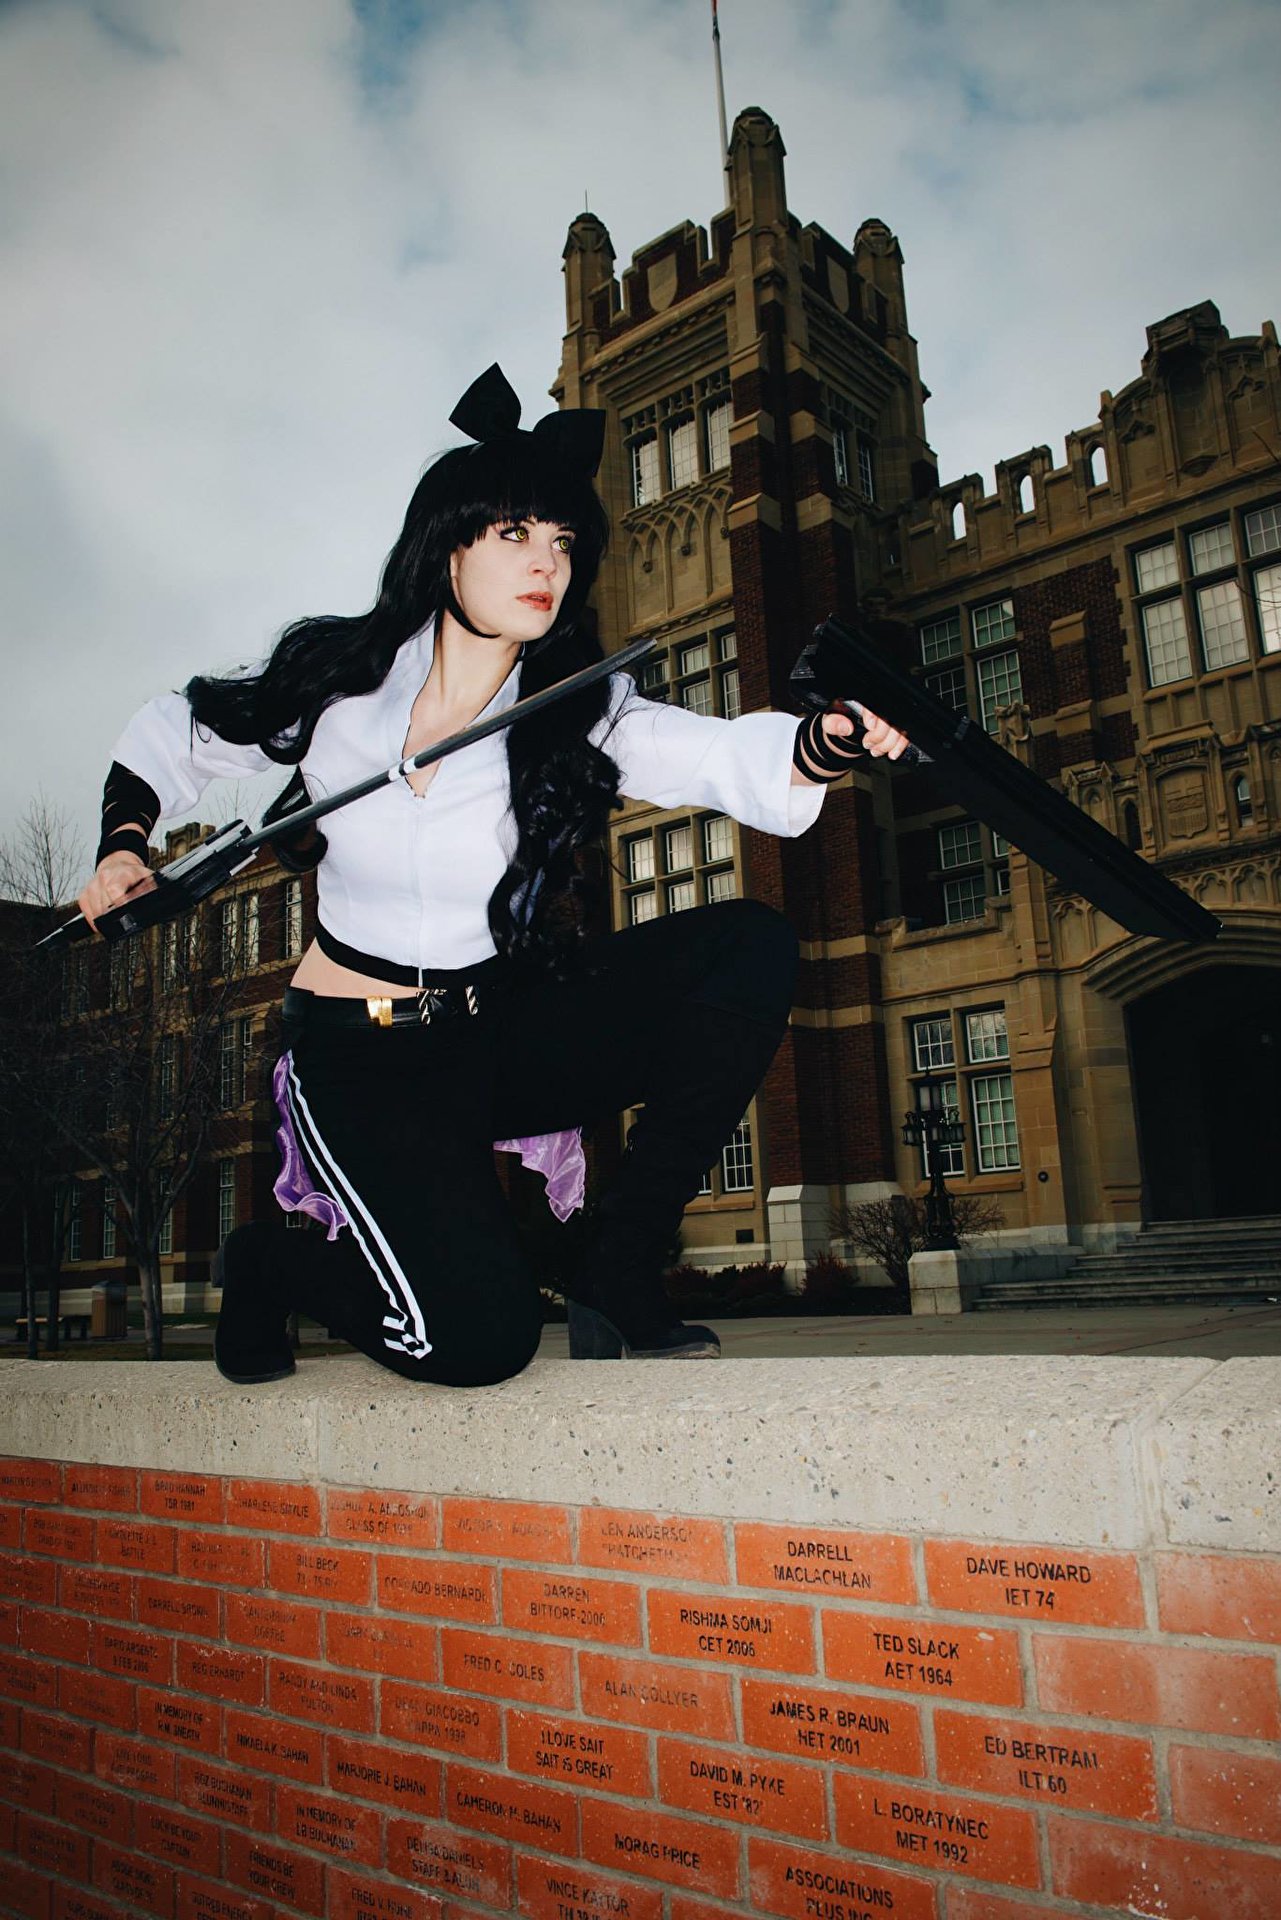 Cospix.net photo featuring Yousei Cosplay